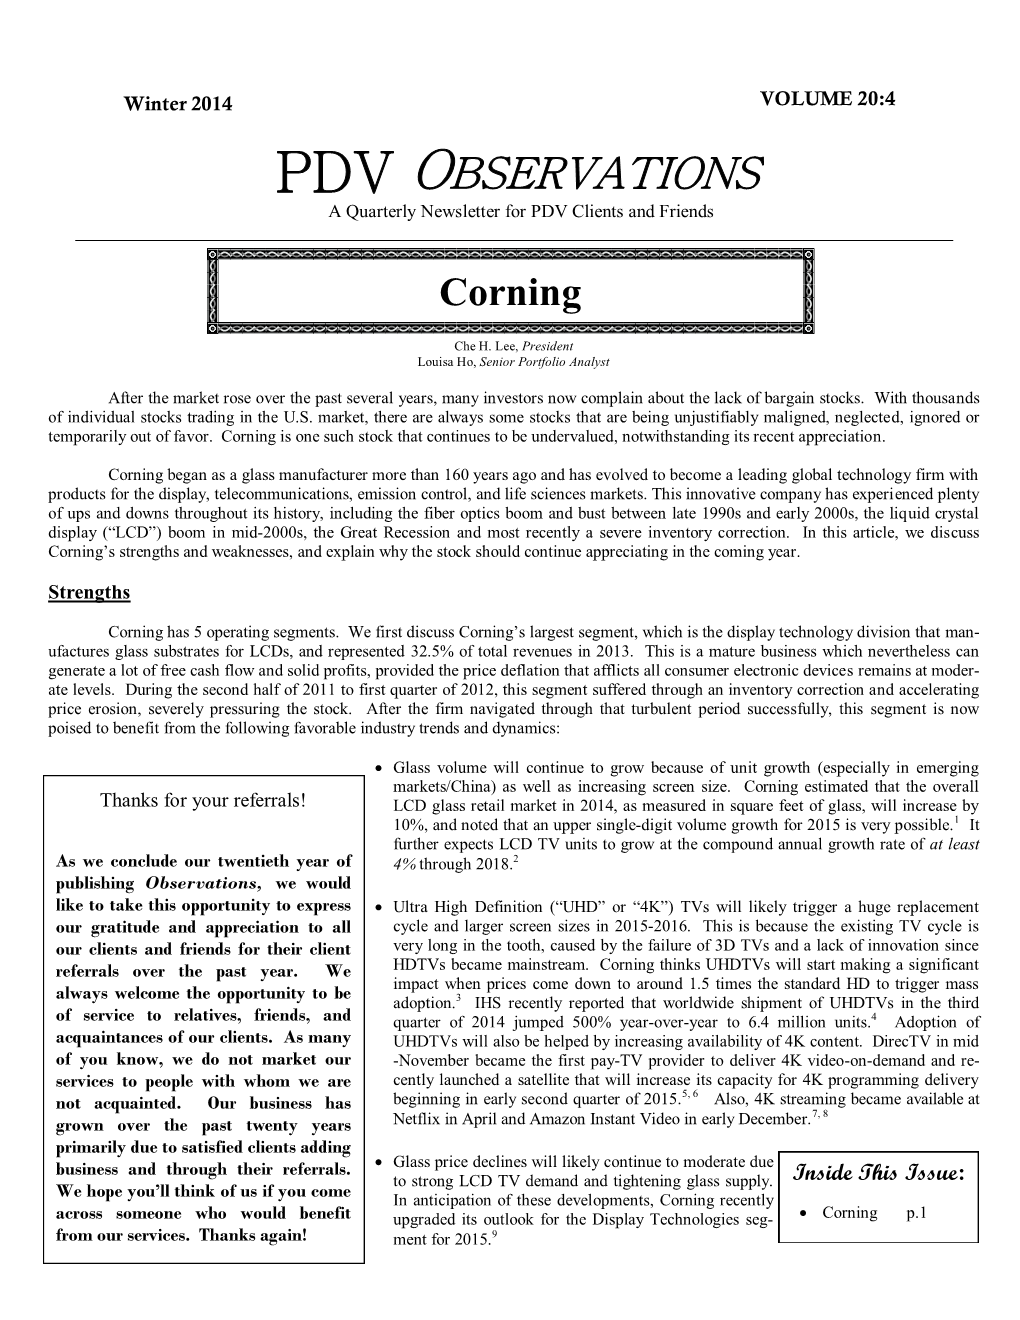 PDV OBSERVATIONS a Quarterly Newsletter for PDV Clients and Friends